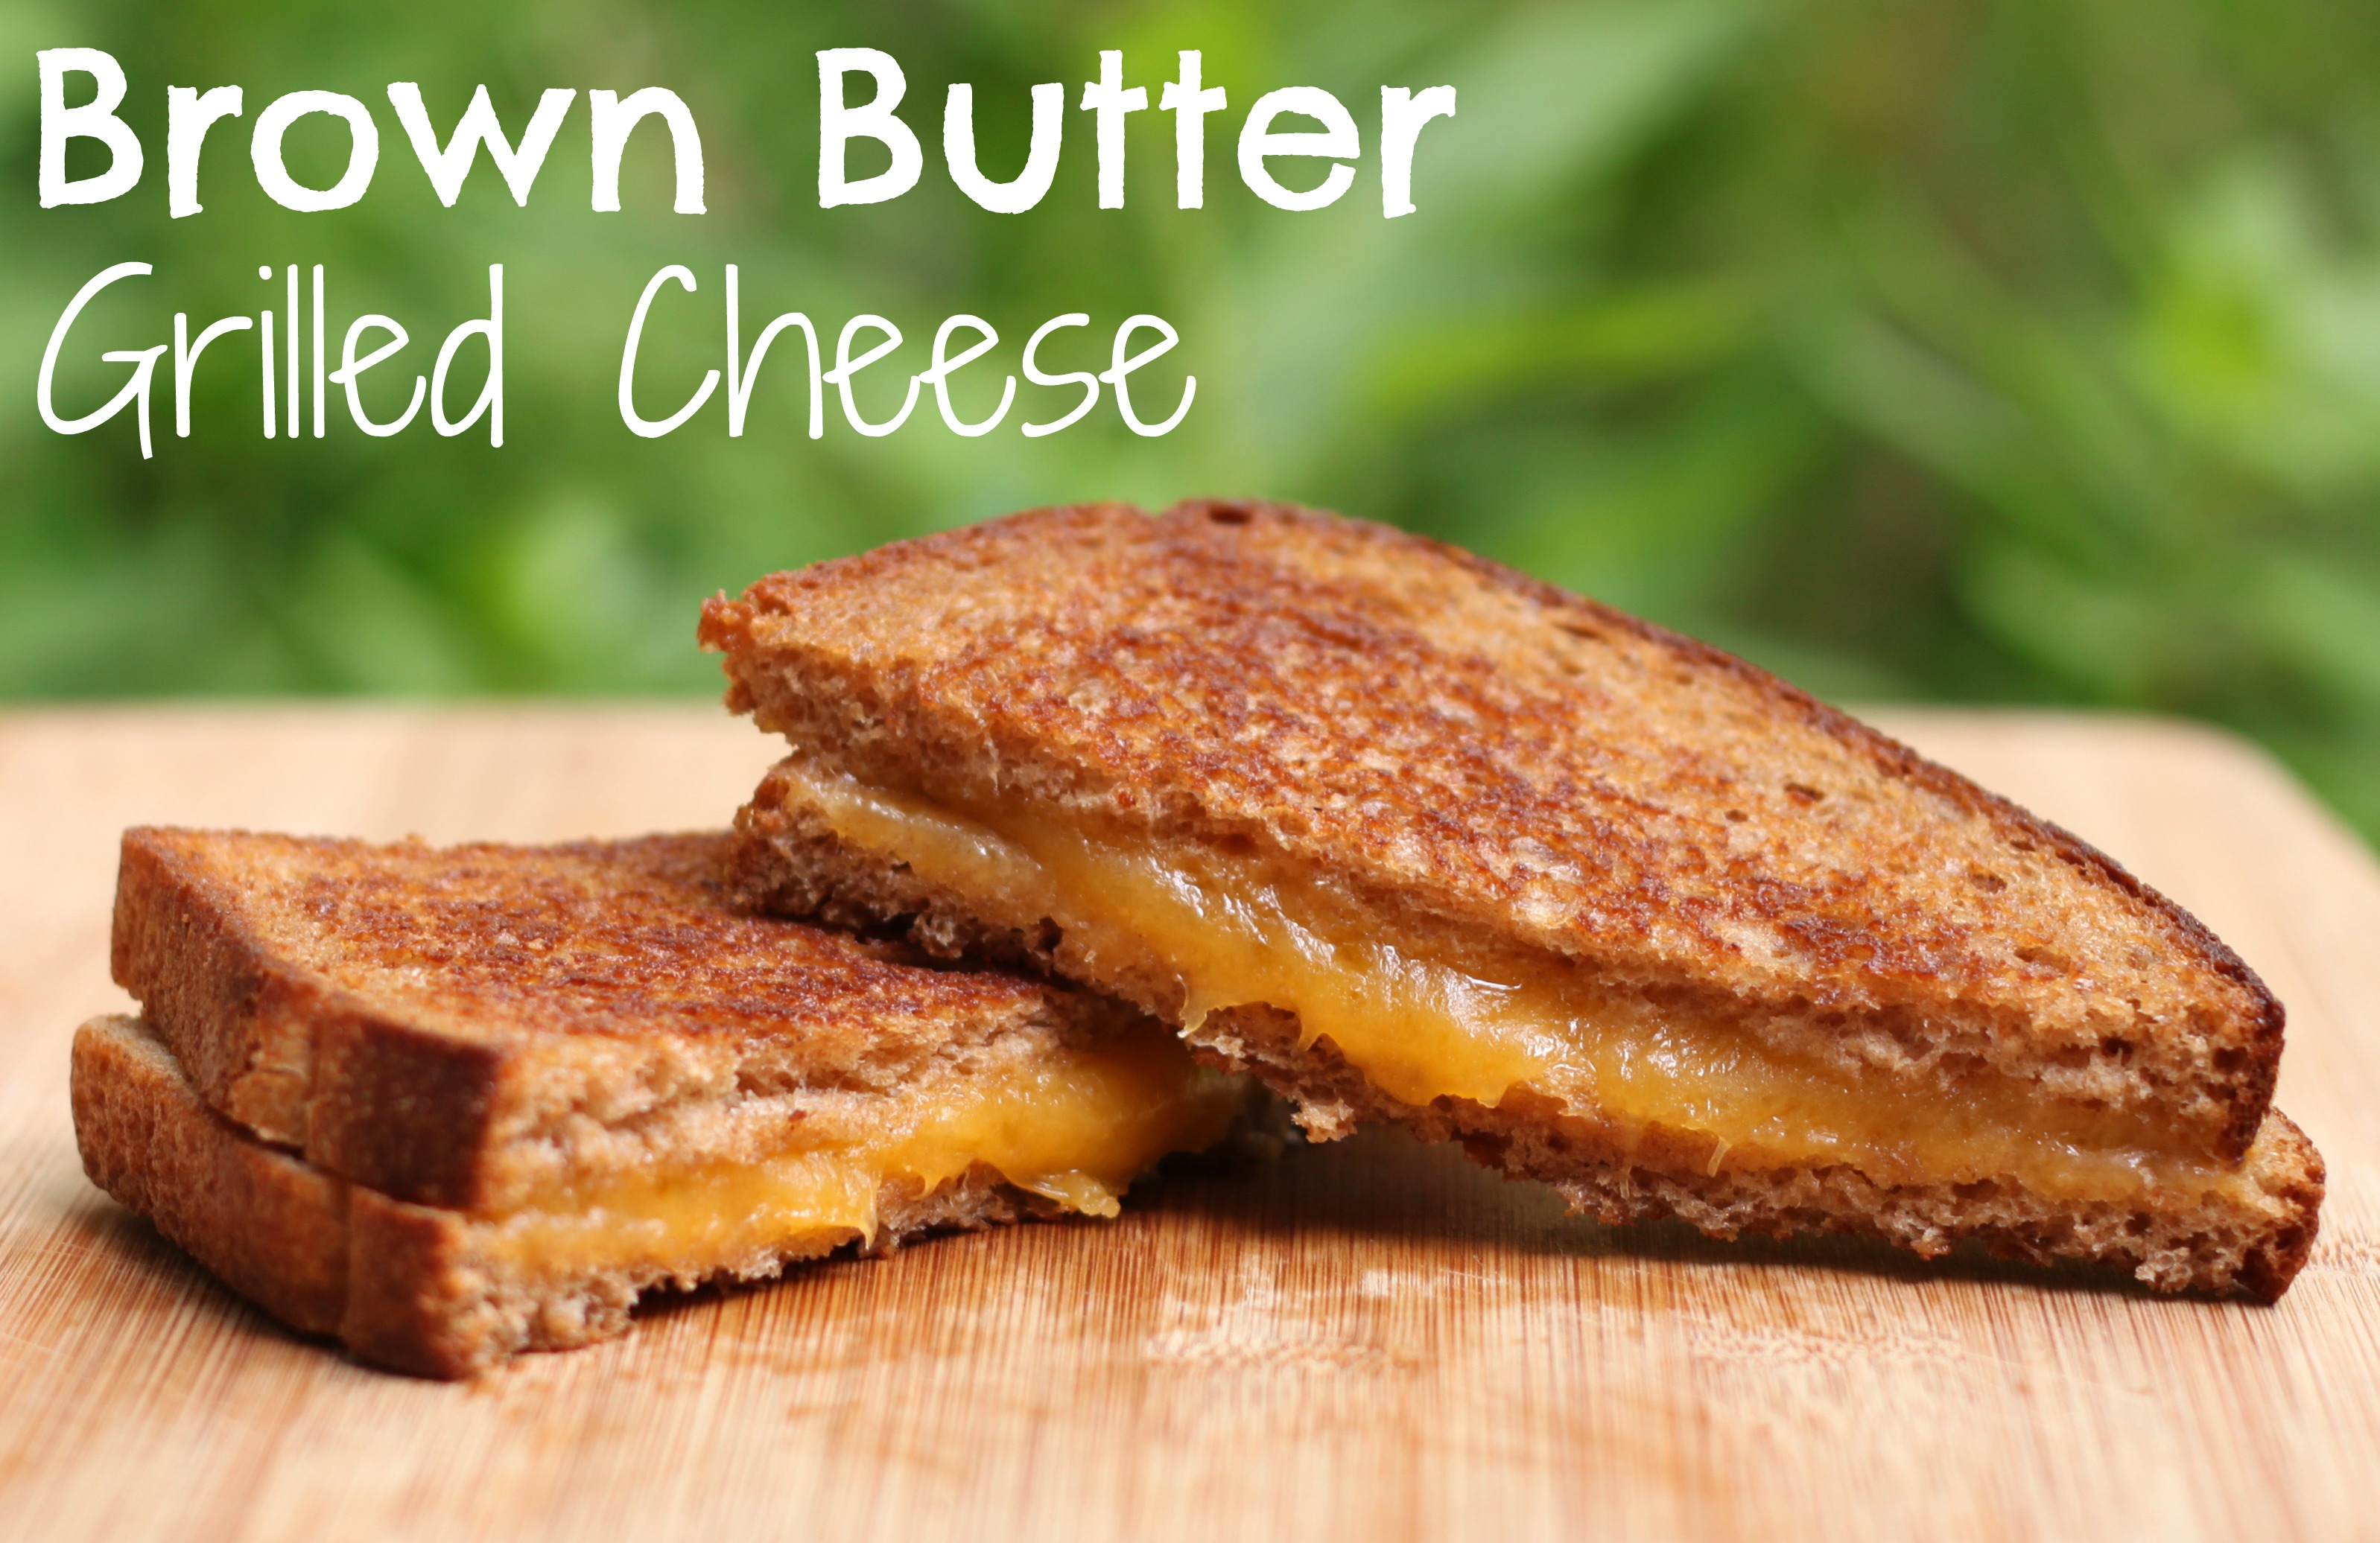 Brown butter grilled cheese with text 3